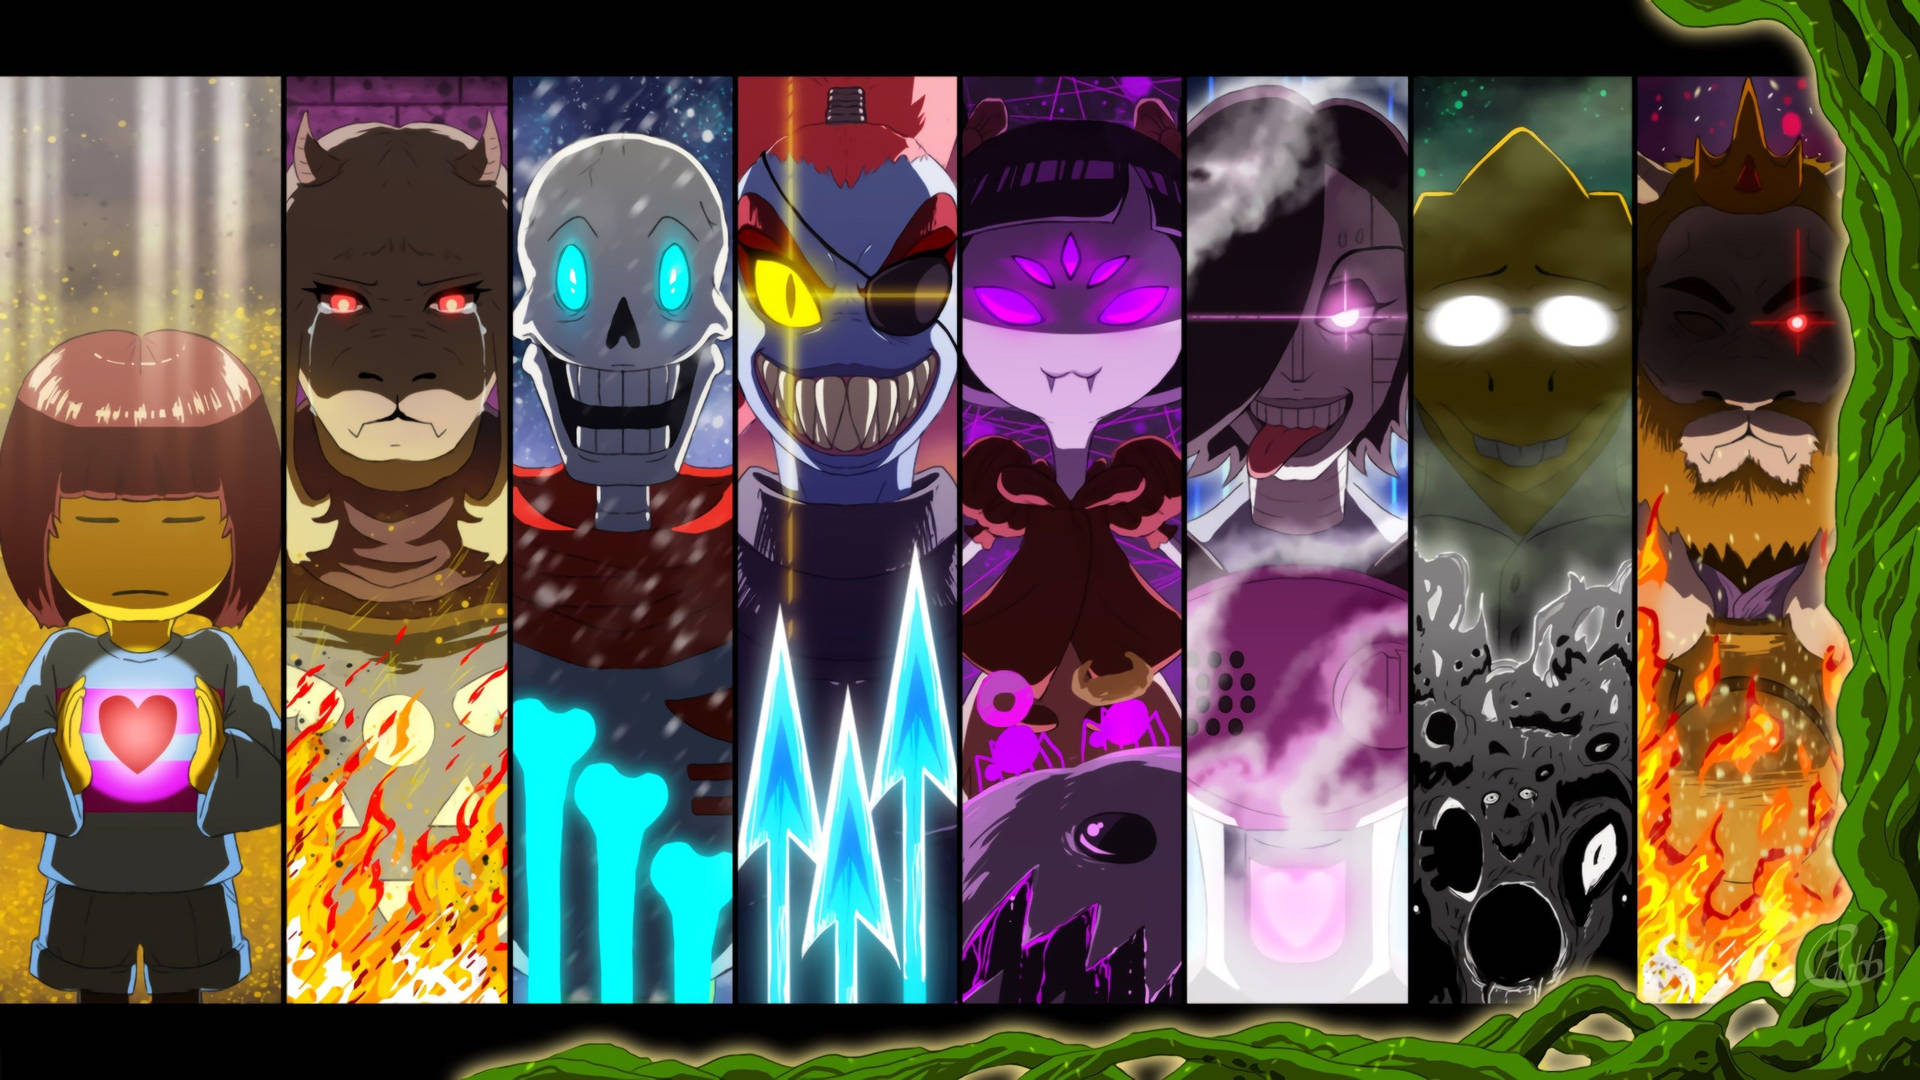 The beloved Undertale characters Wallpaper